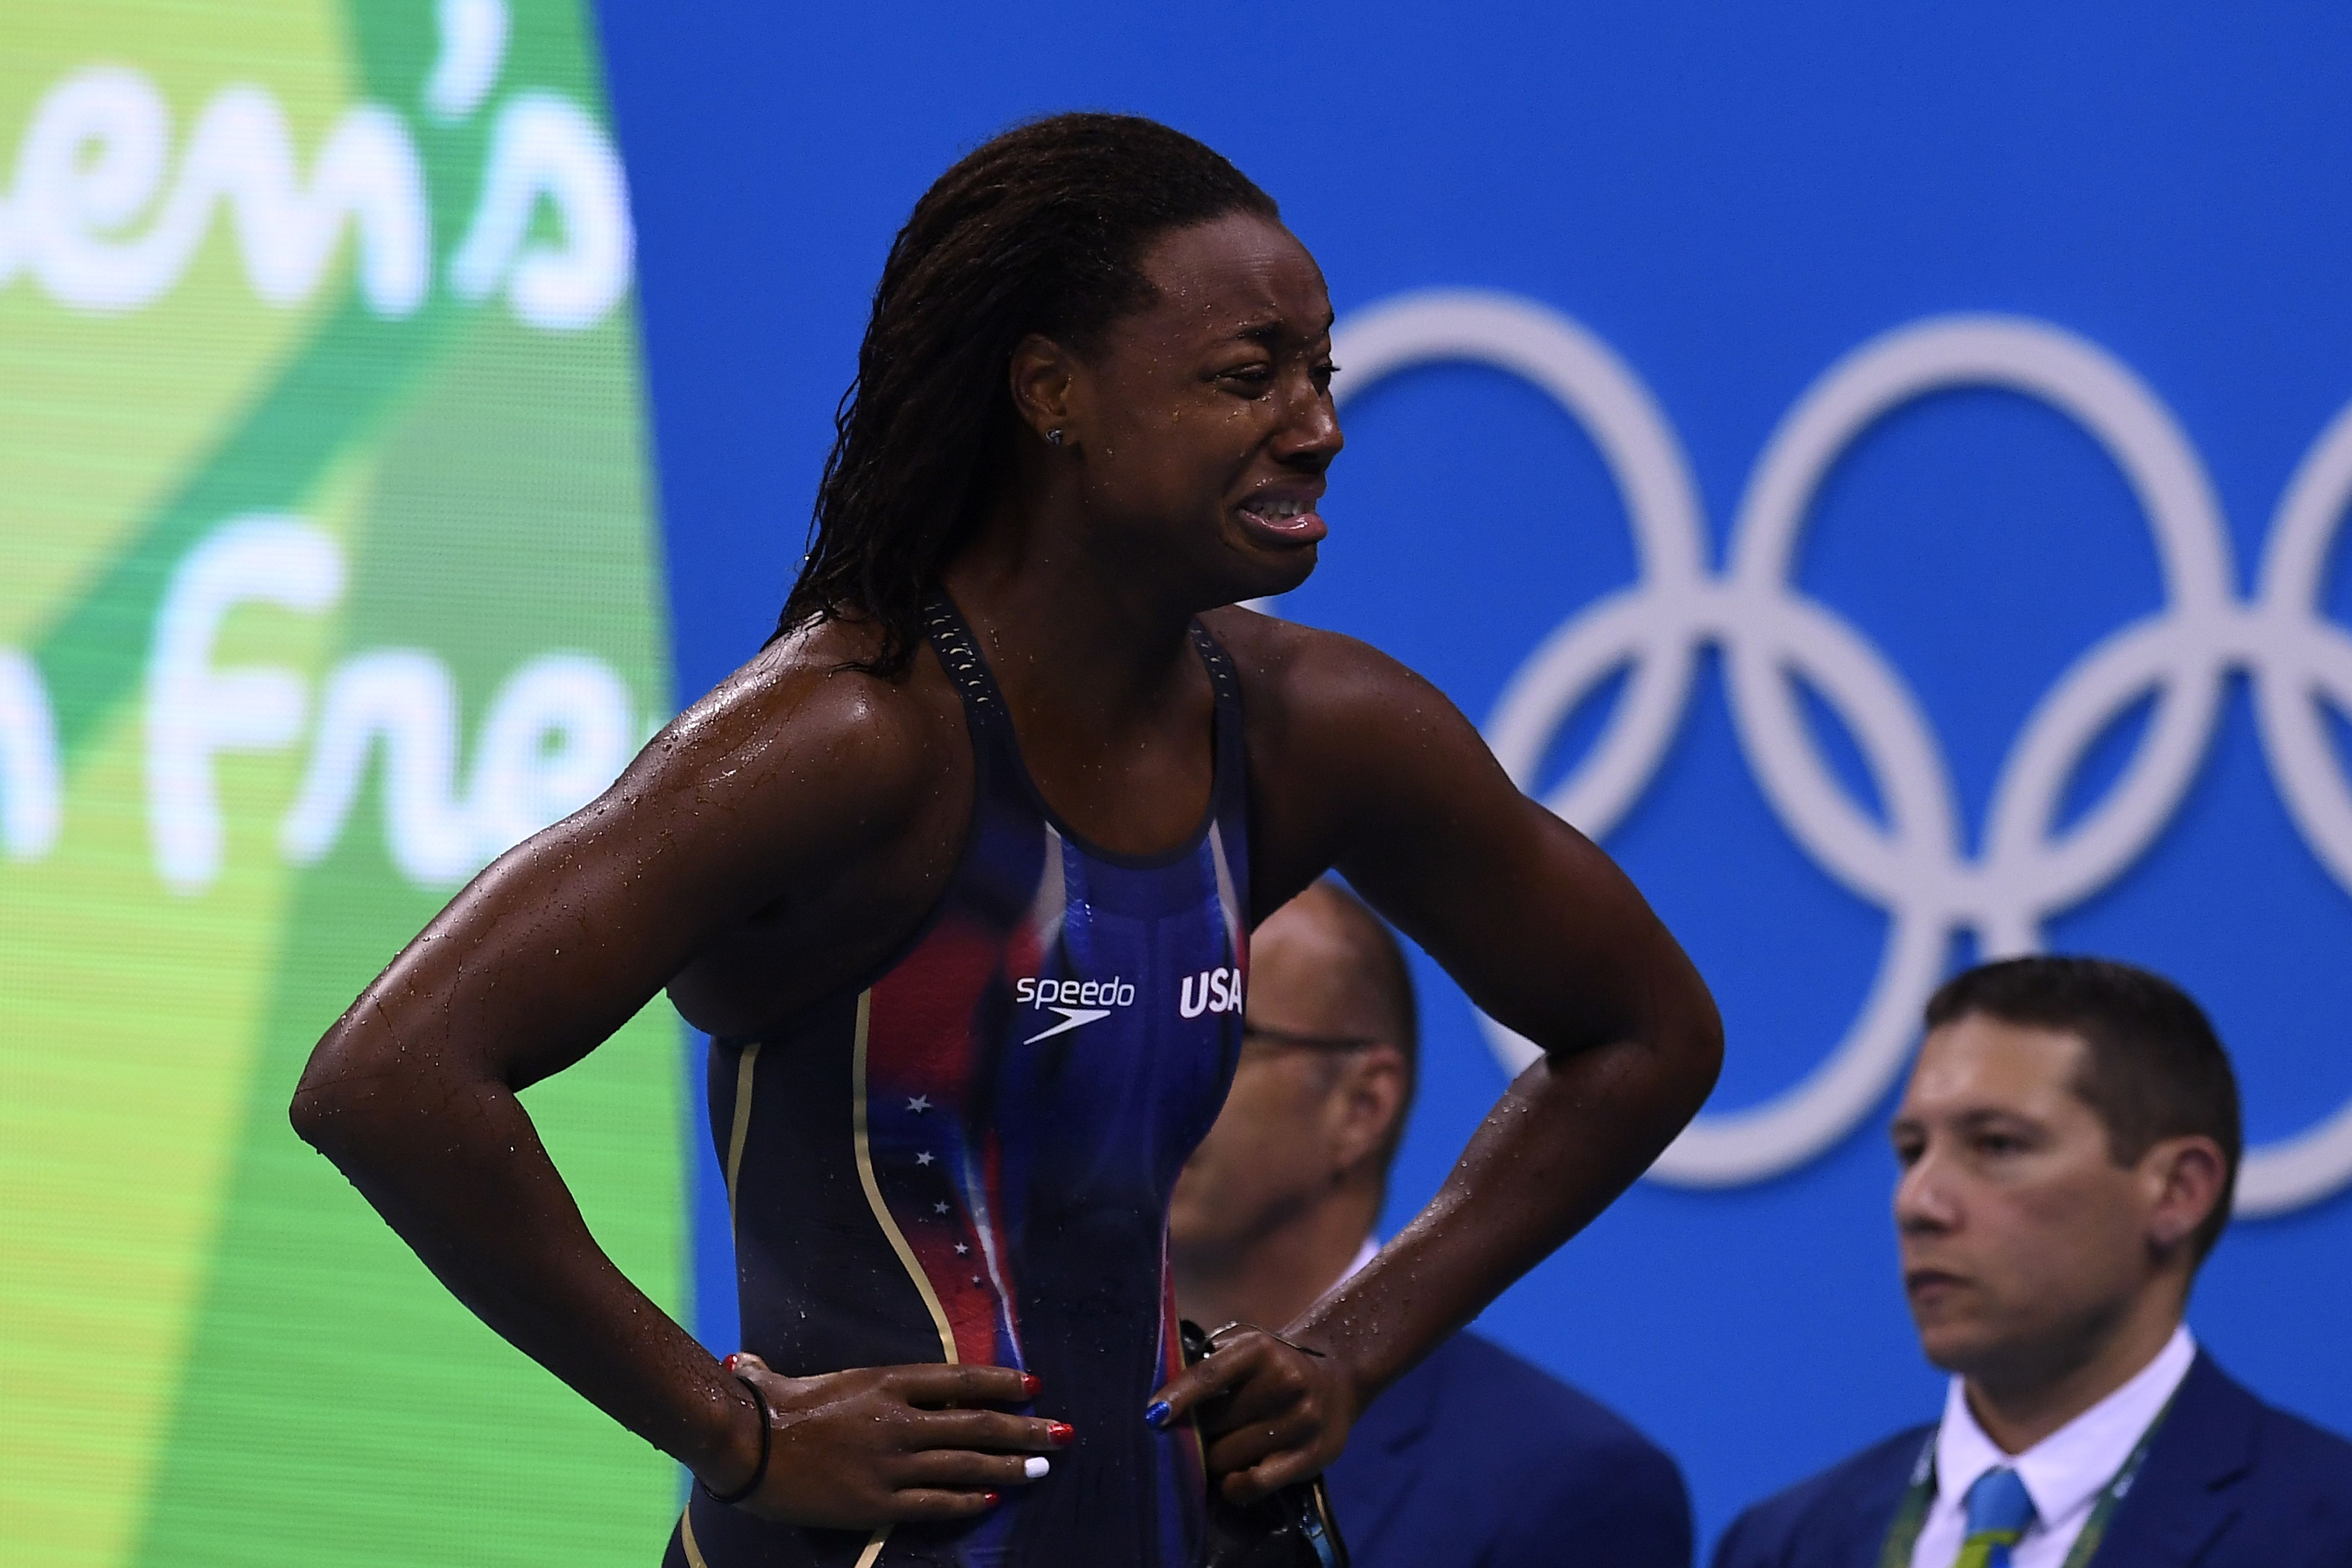 USA's Simone Manuel cries after she won the Women's 100m Freestyle Final during the swimming event at the Rio 2016 Olympic Games at the Olympic Aquatics Stadium in Rio de Janeiro. (GABRIEL BOUYS/AFP/Getty Images)